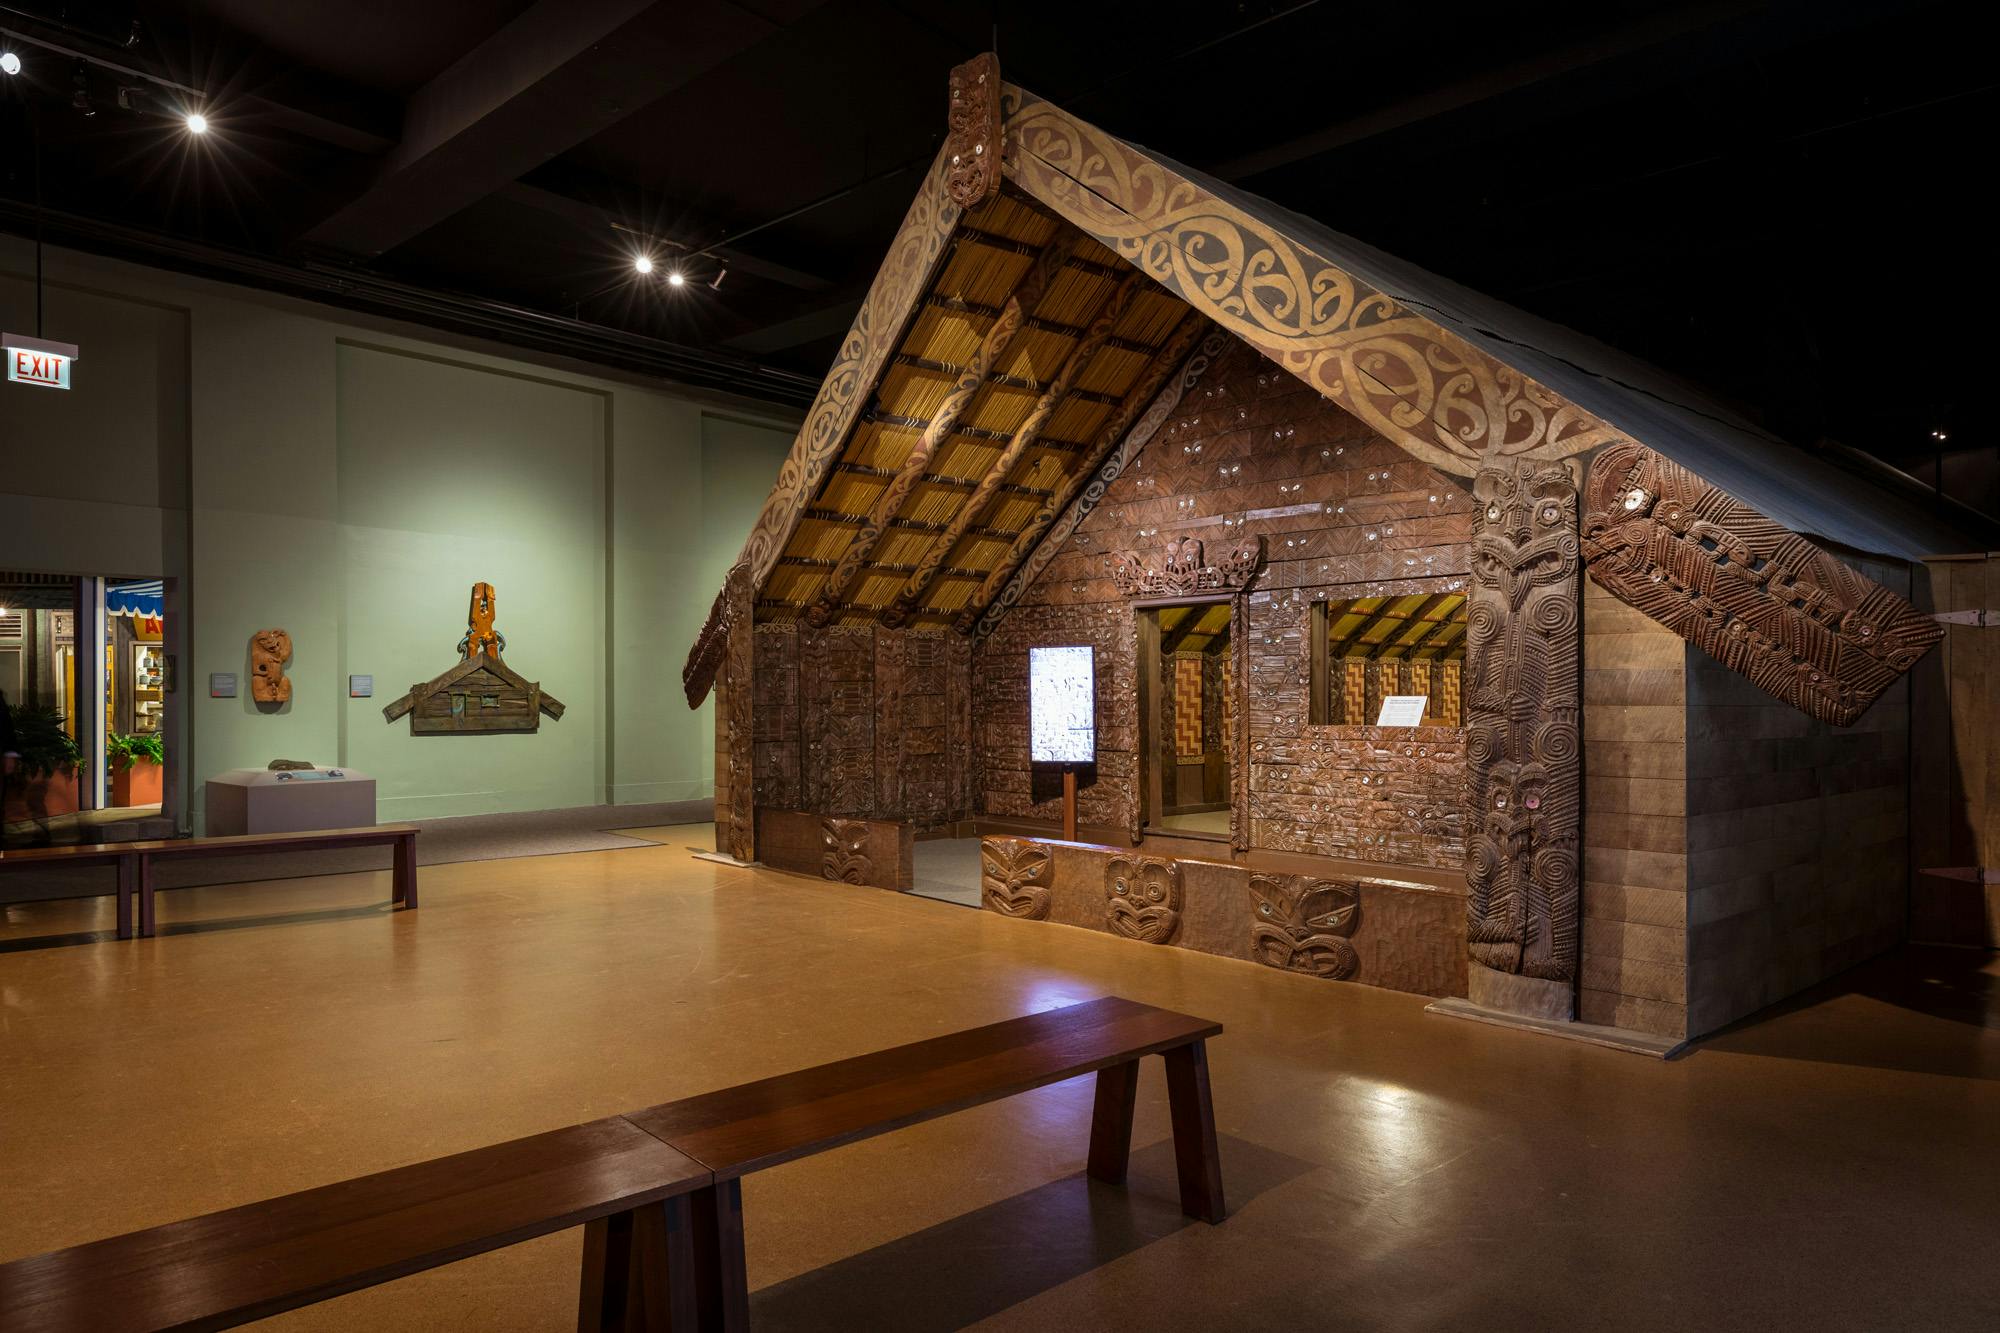 A three-quarter view of the front of the Maori Meeting HouseCarvings decorate the house’s walls and beams. At the apex of the gabled roof are two carved faces. One is Ruatepupuke, for whom this house is named.